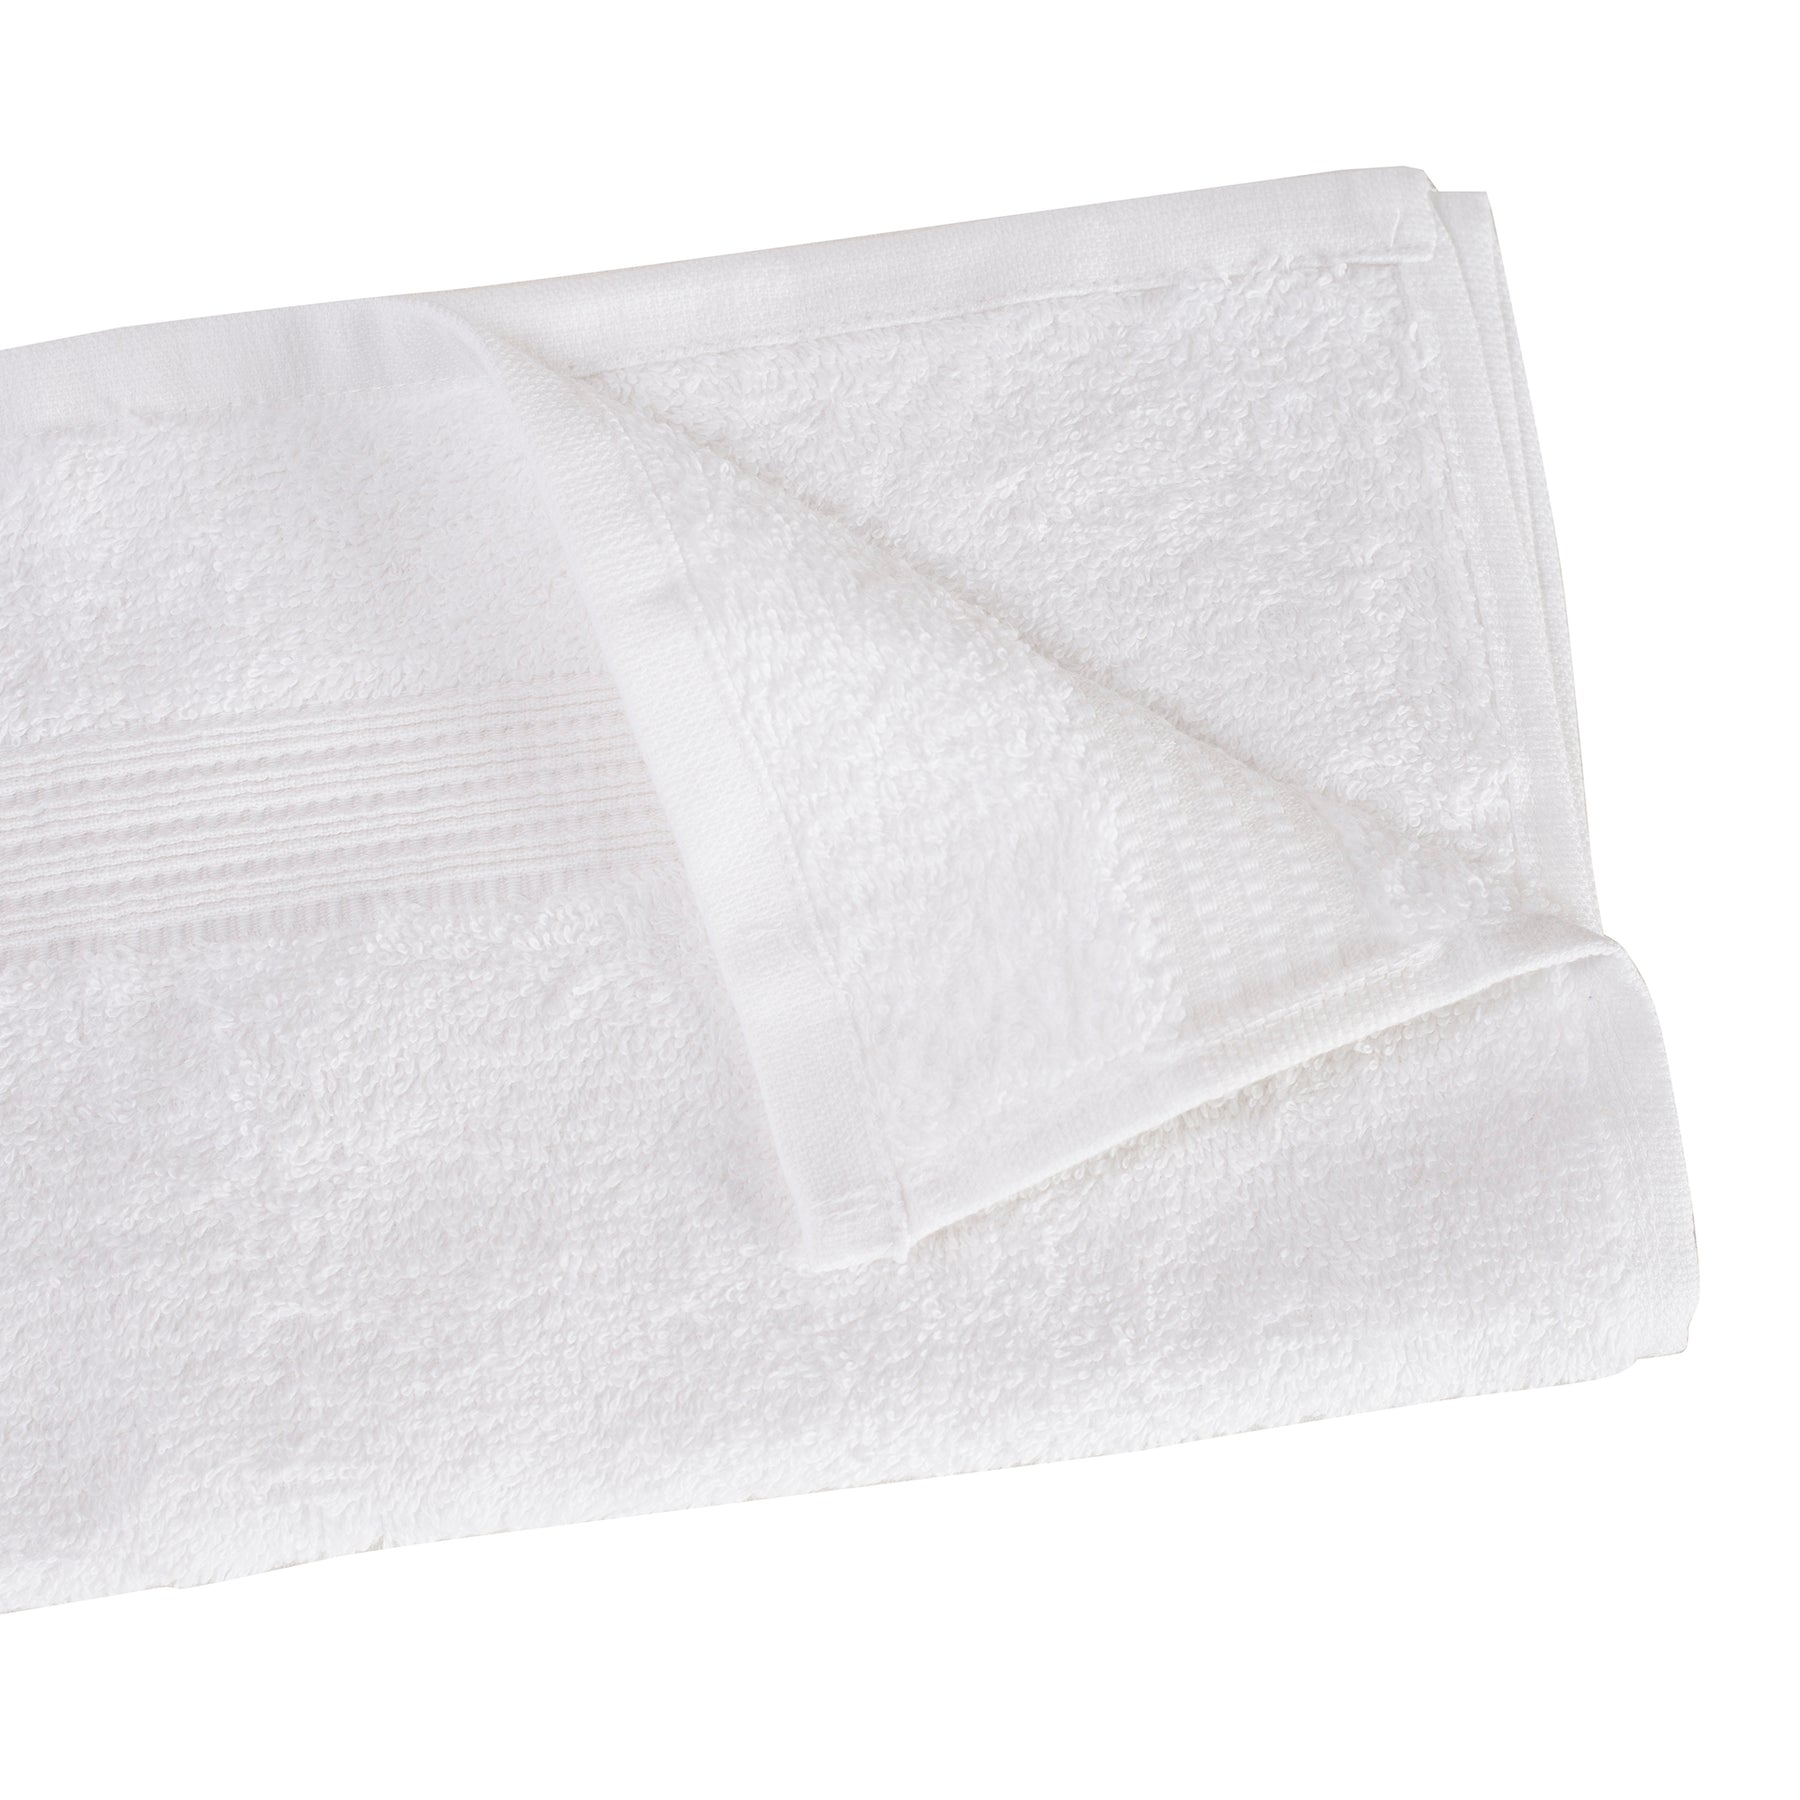 Jeneth Ultra-soft and highly absorbant White Towel Set